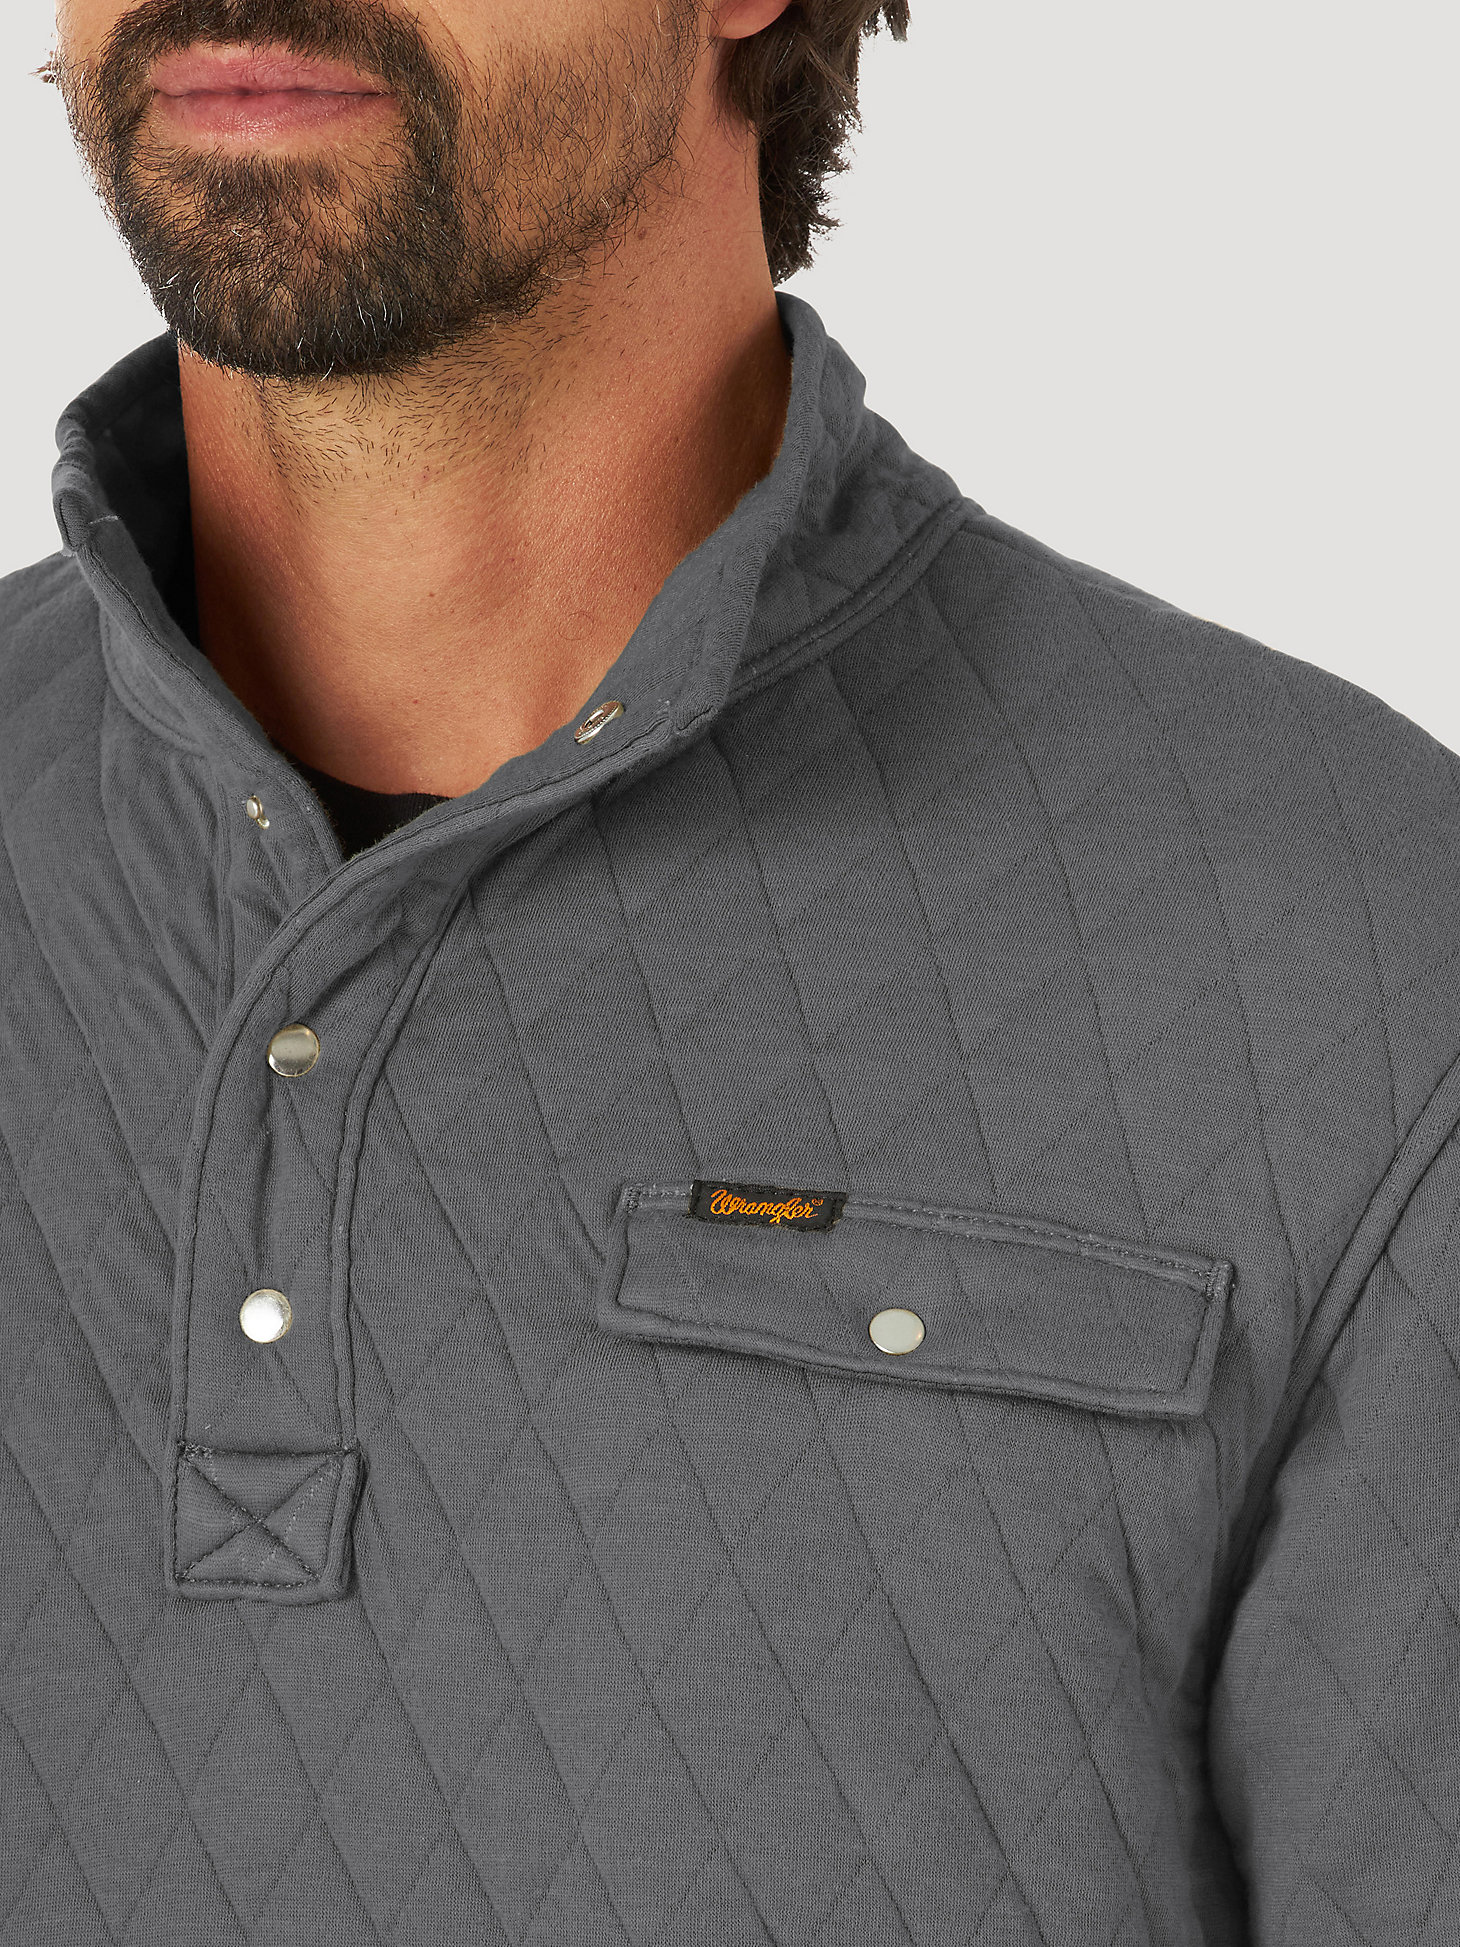 Men's Wrangler Quarter Snaps Quilted Pullover Jacket in Heather Grey alternative view 1